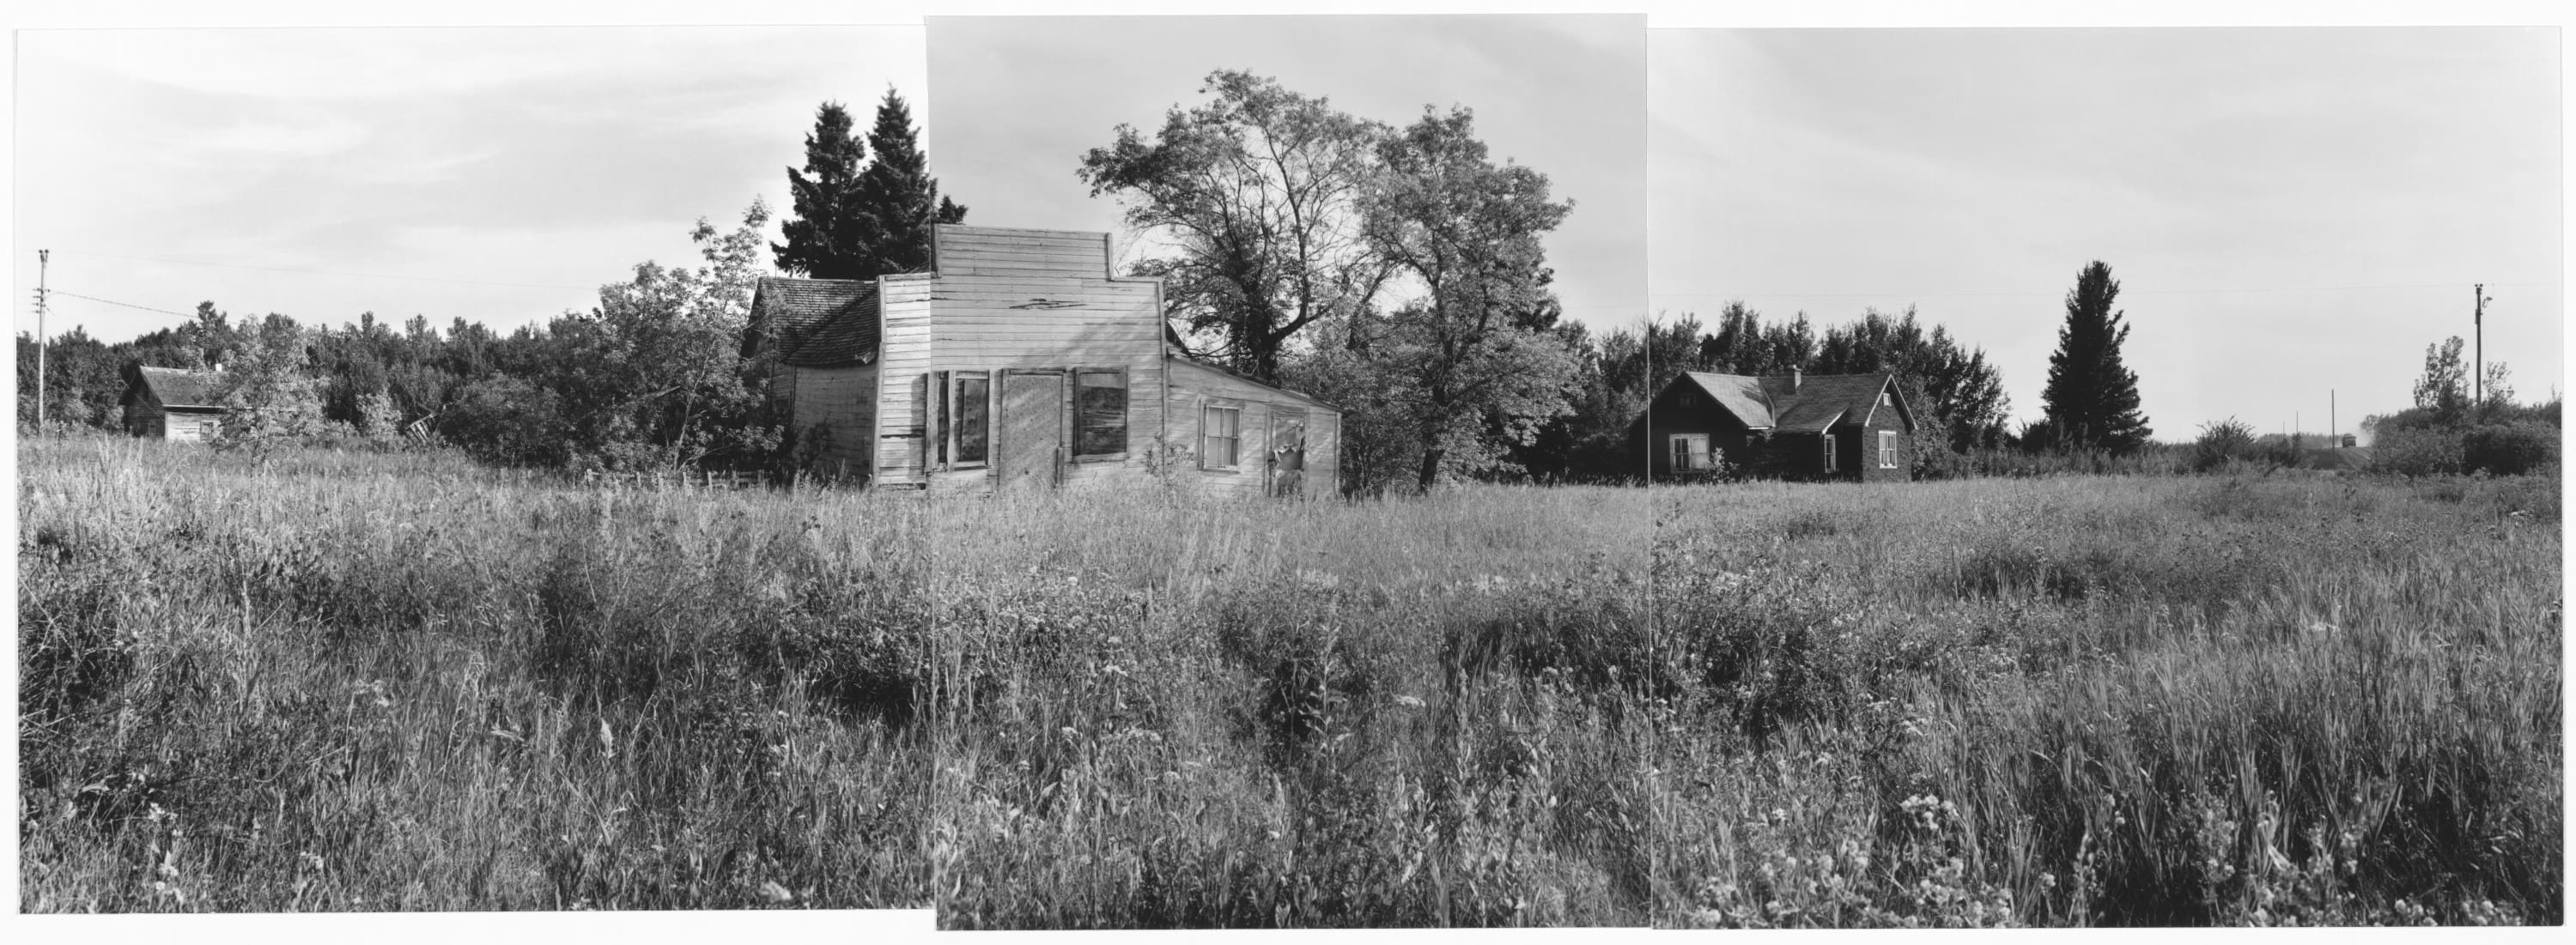 Black and white three panel panorama of an old school building in the centre sounded by grass and flowers and two smaller buildings at each end.